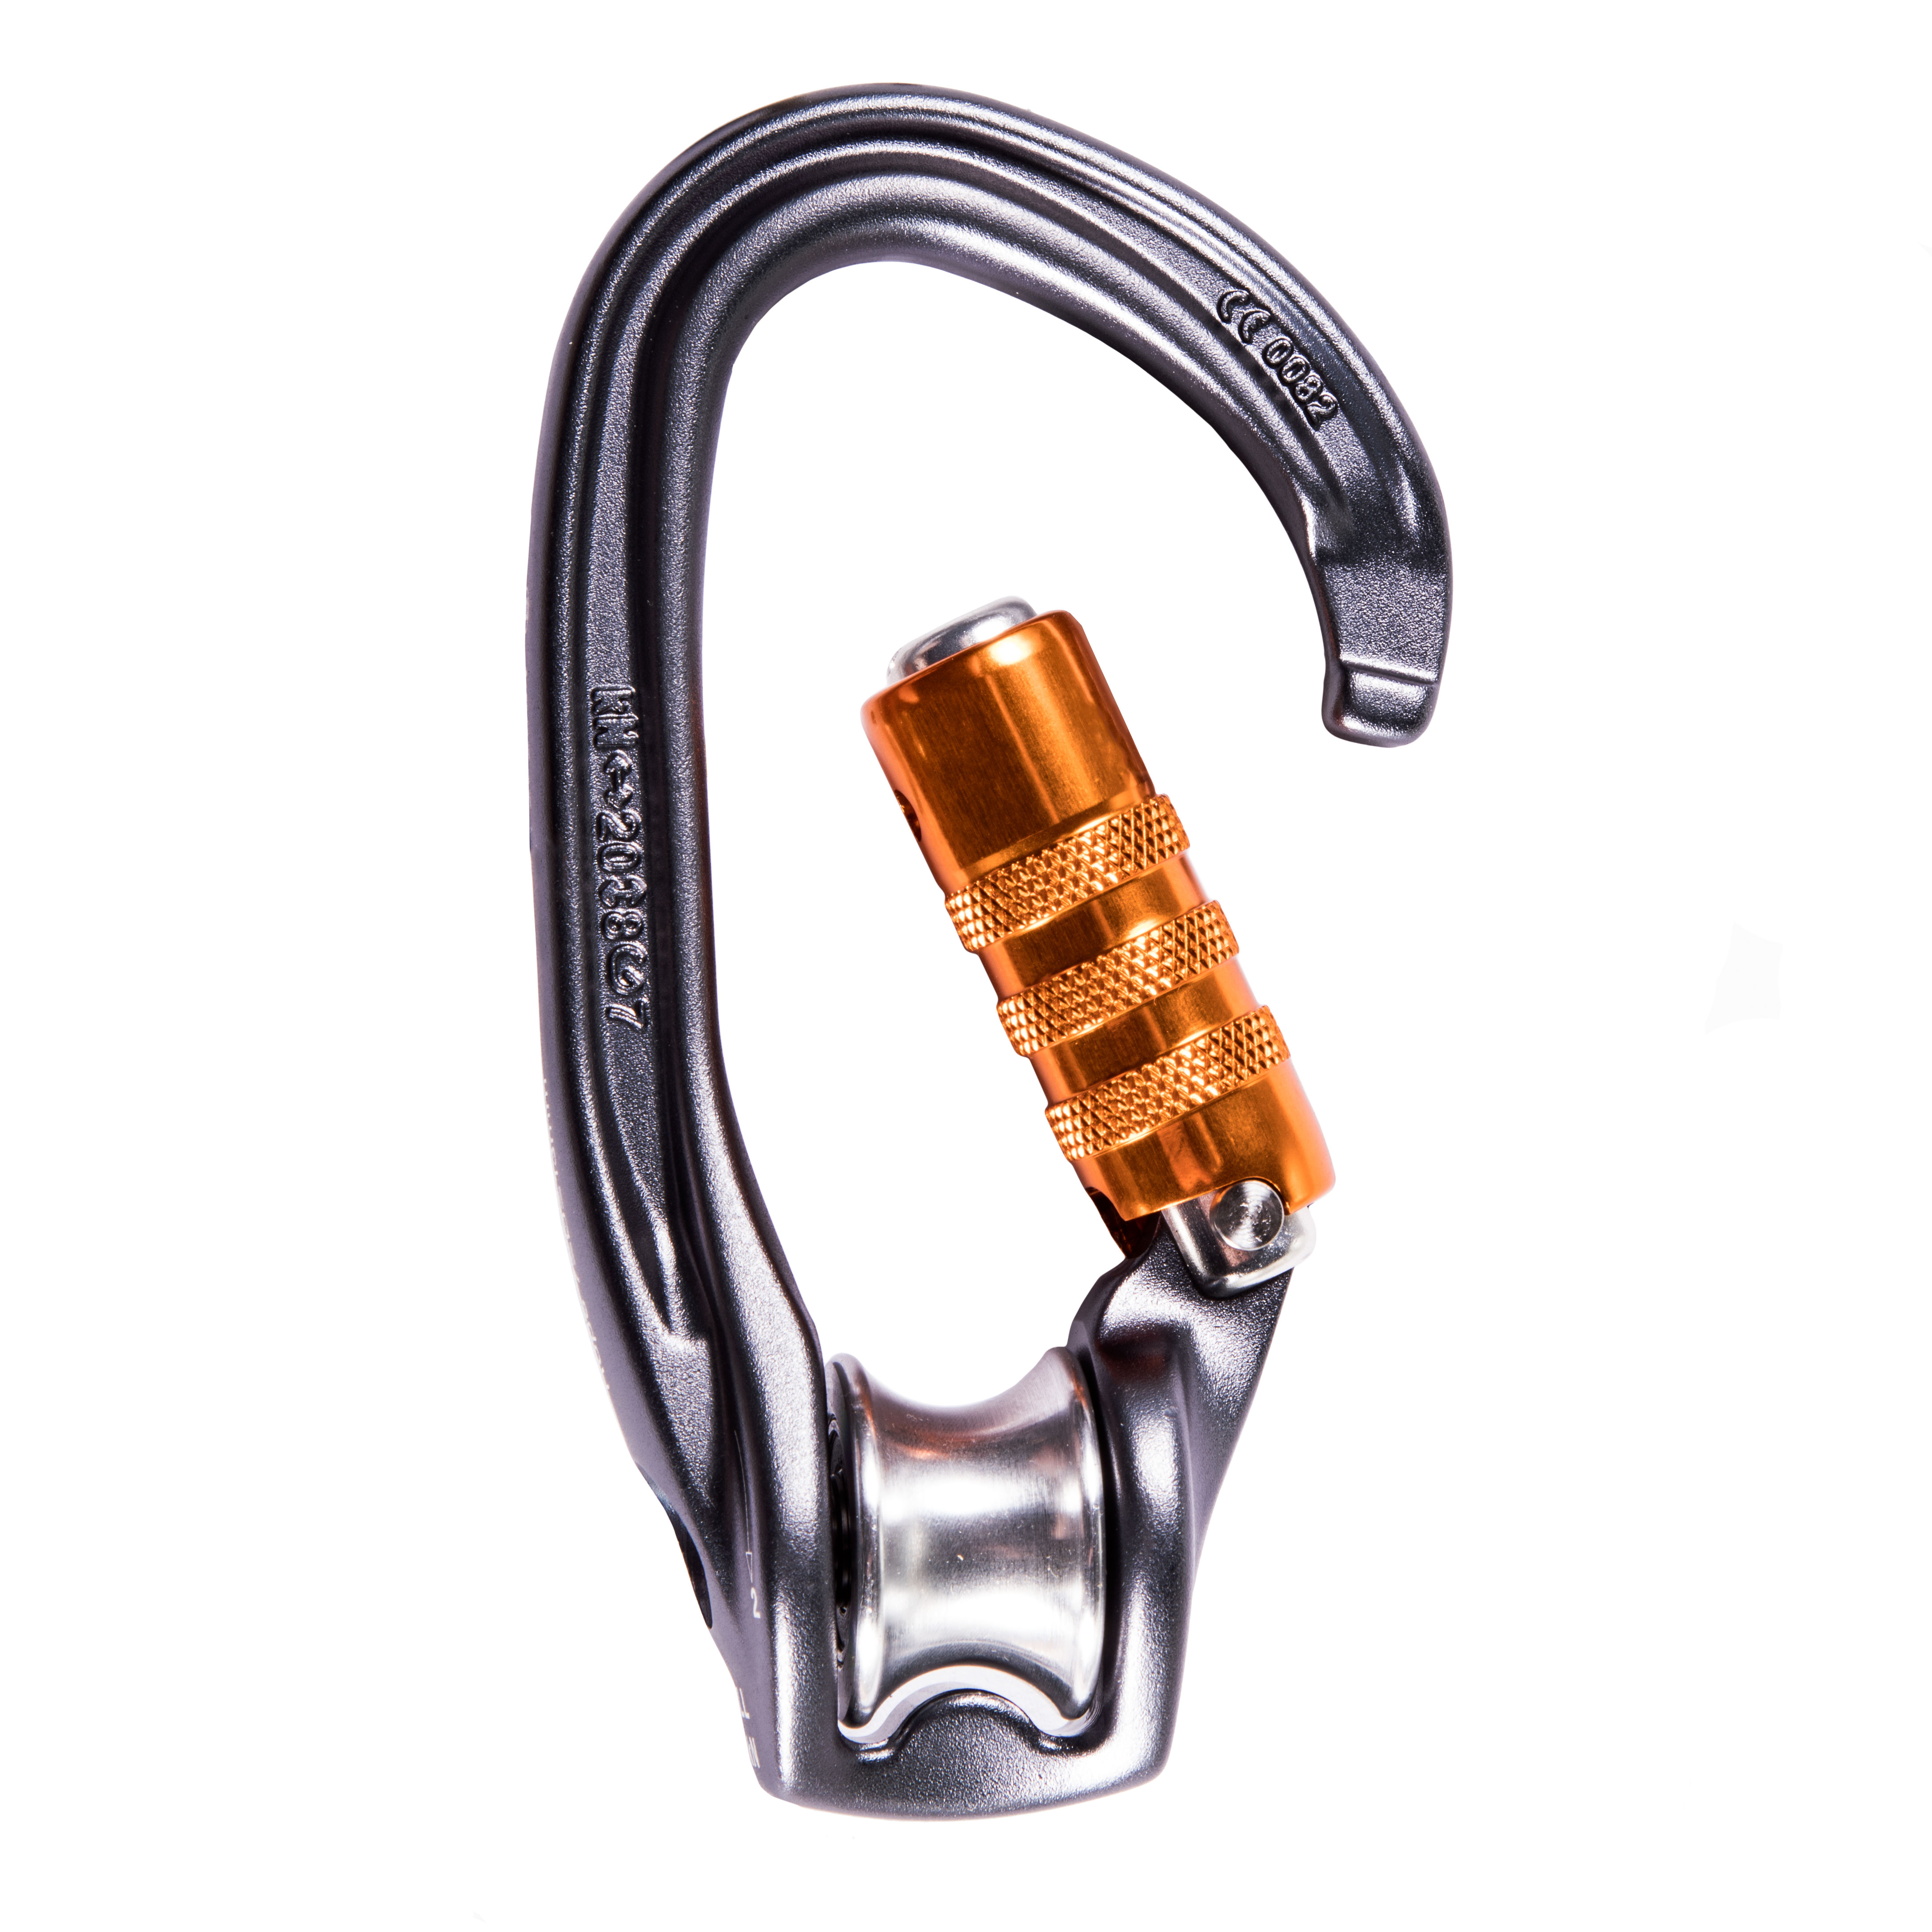 Petzl ROLLCLIP Z Pulley Carabiner Triple Locking great for rescue